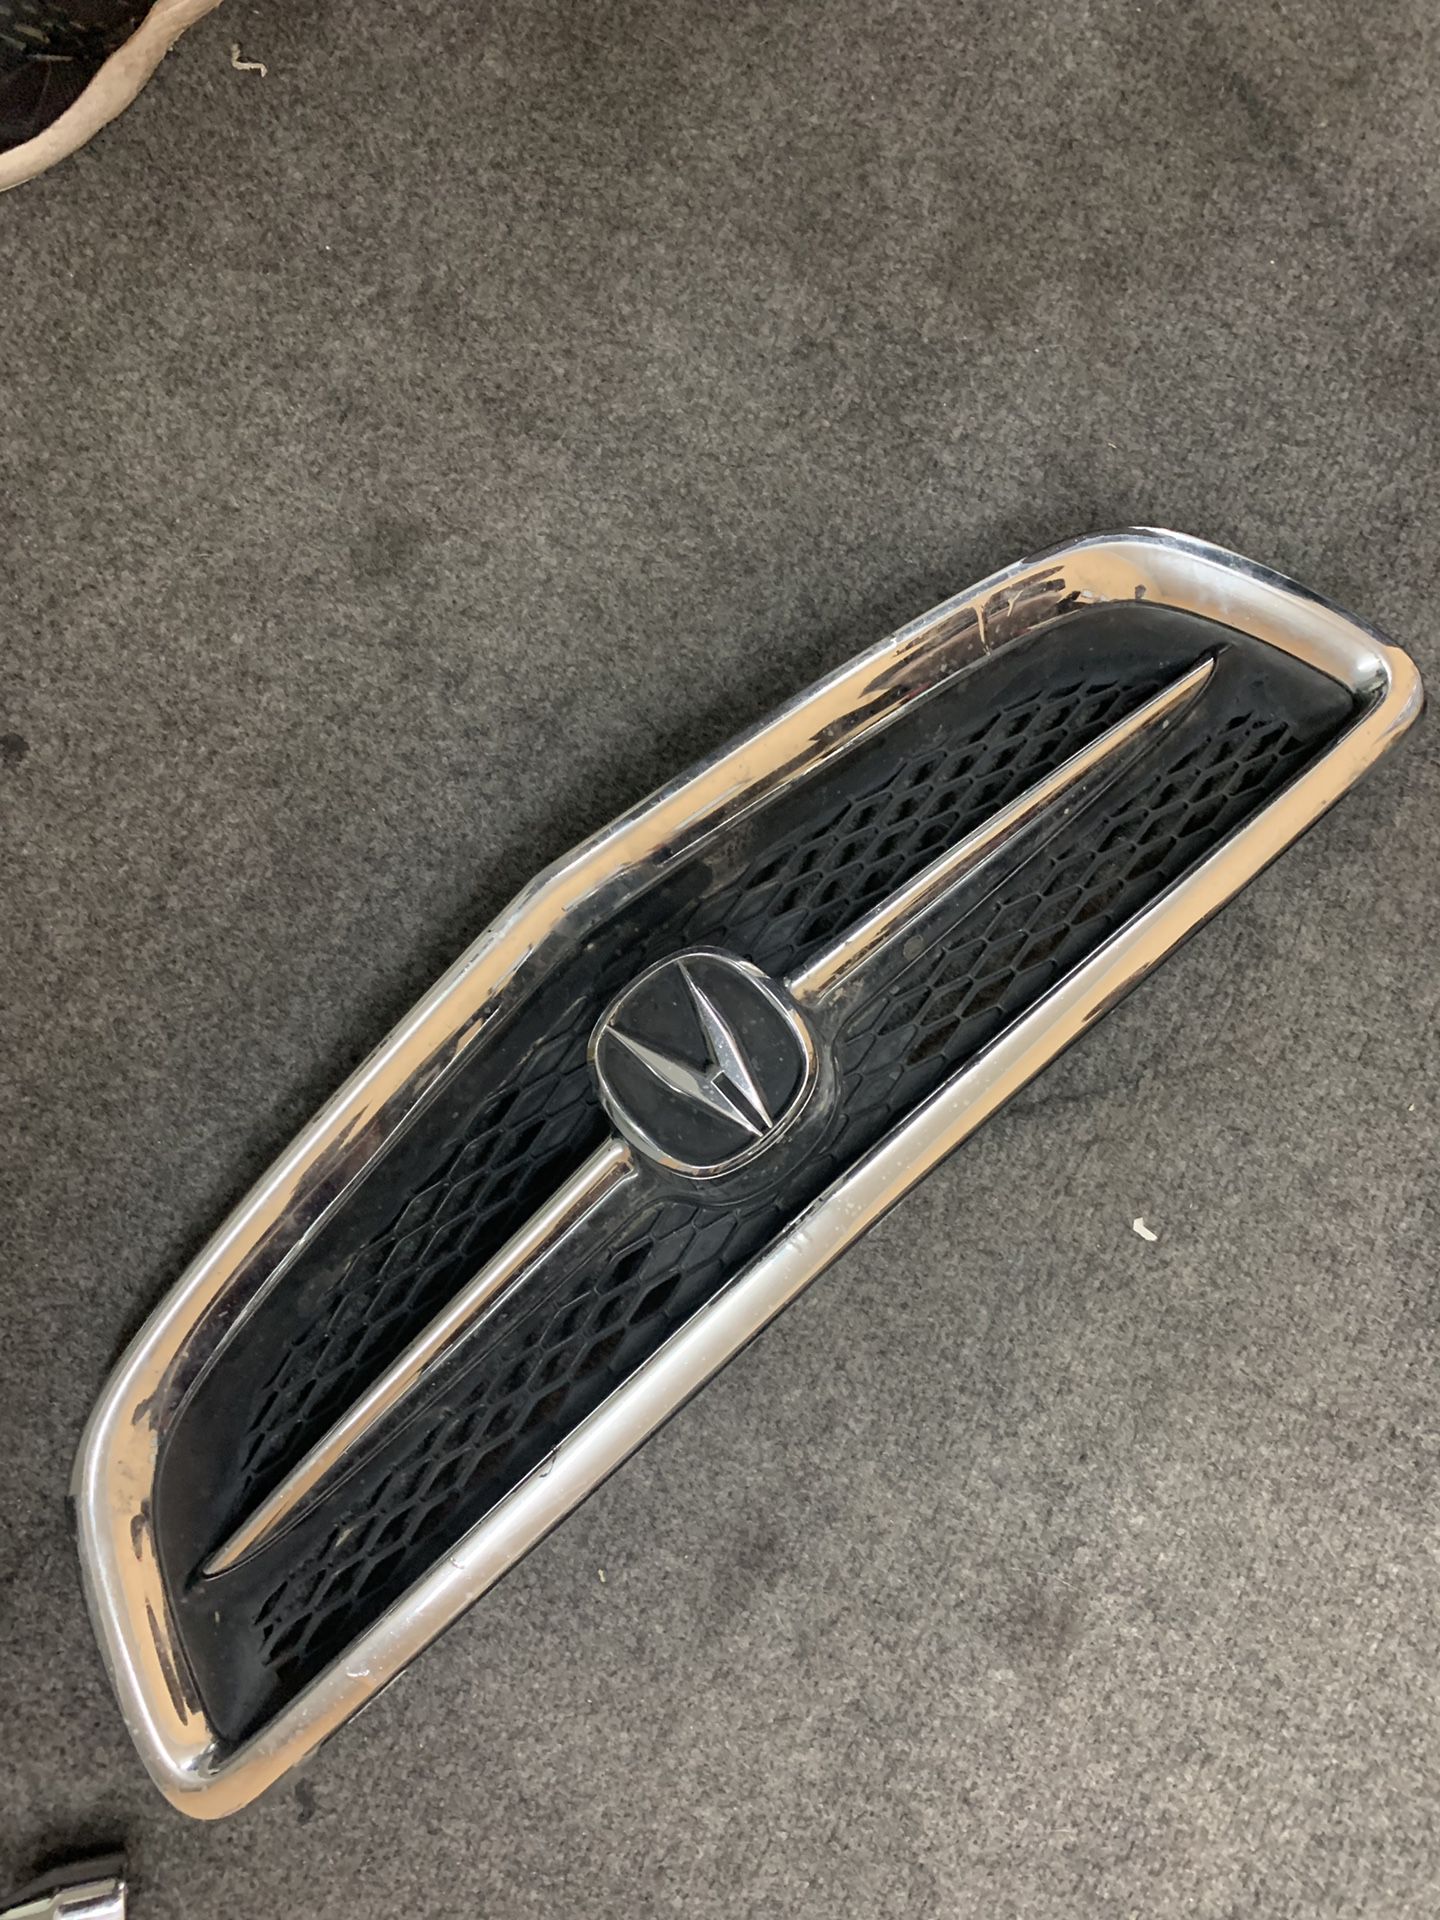 1999 Acura TL front Grille